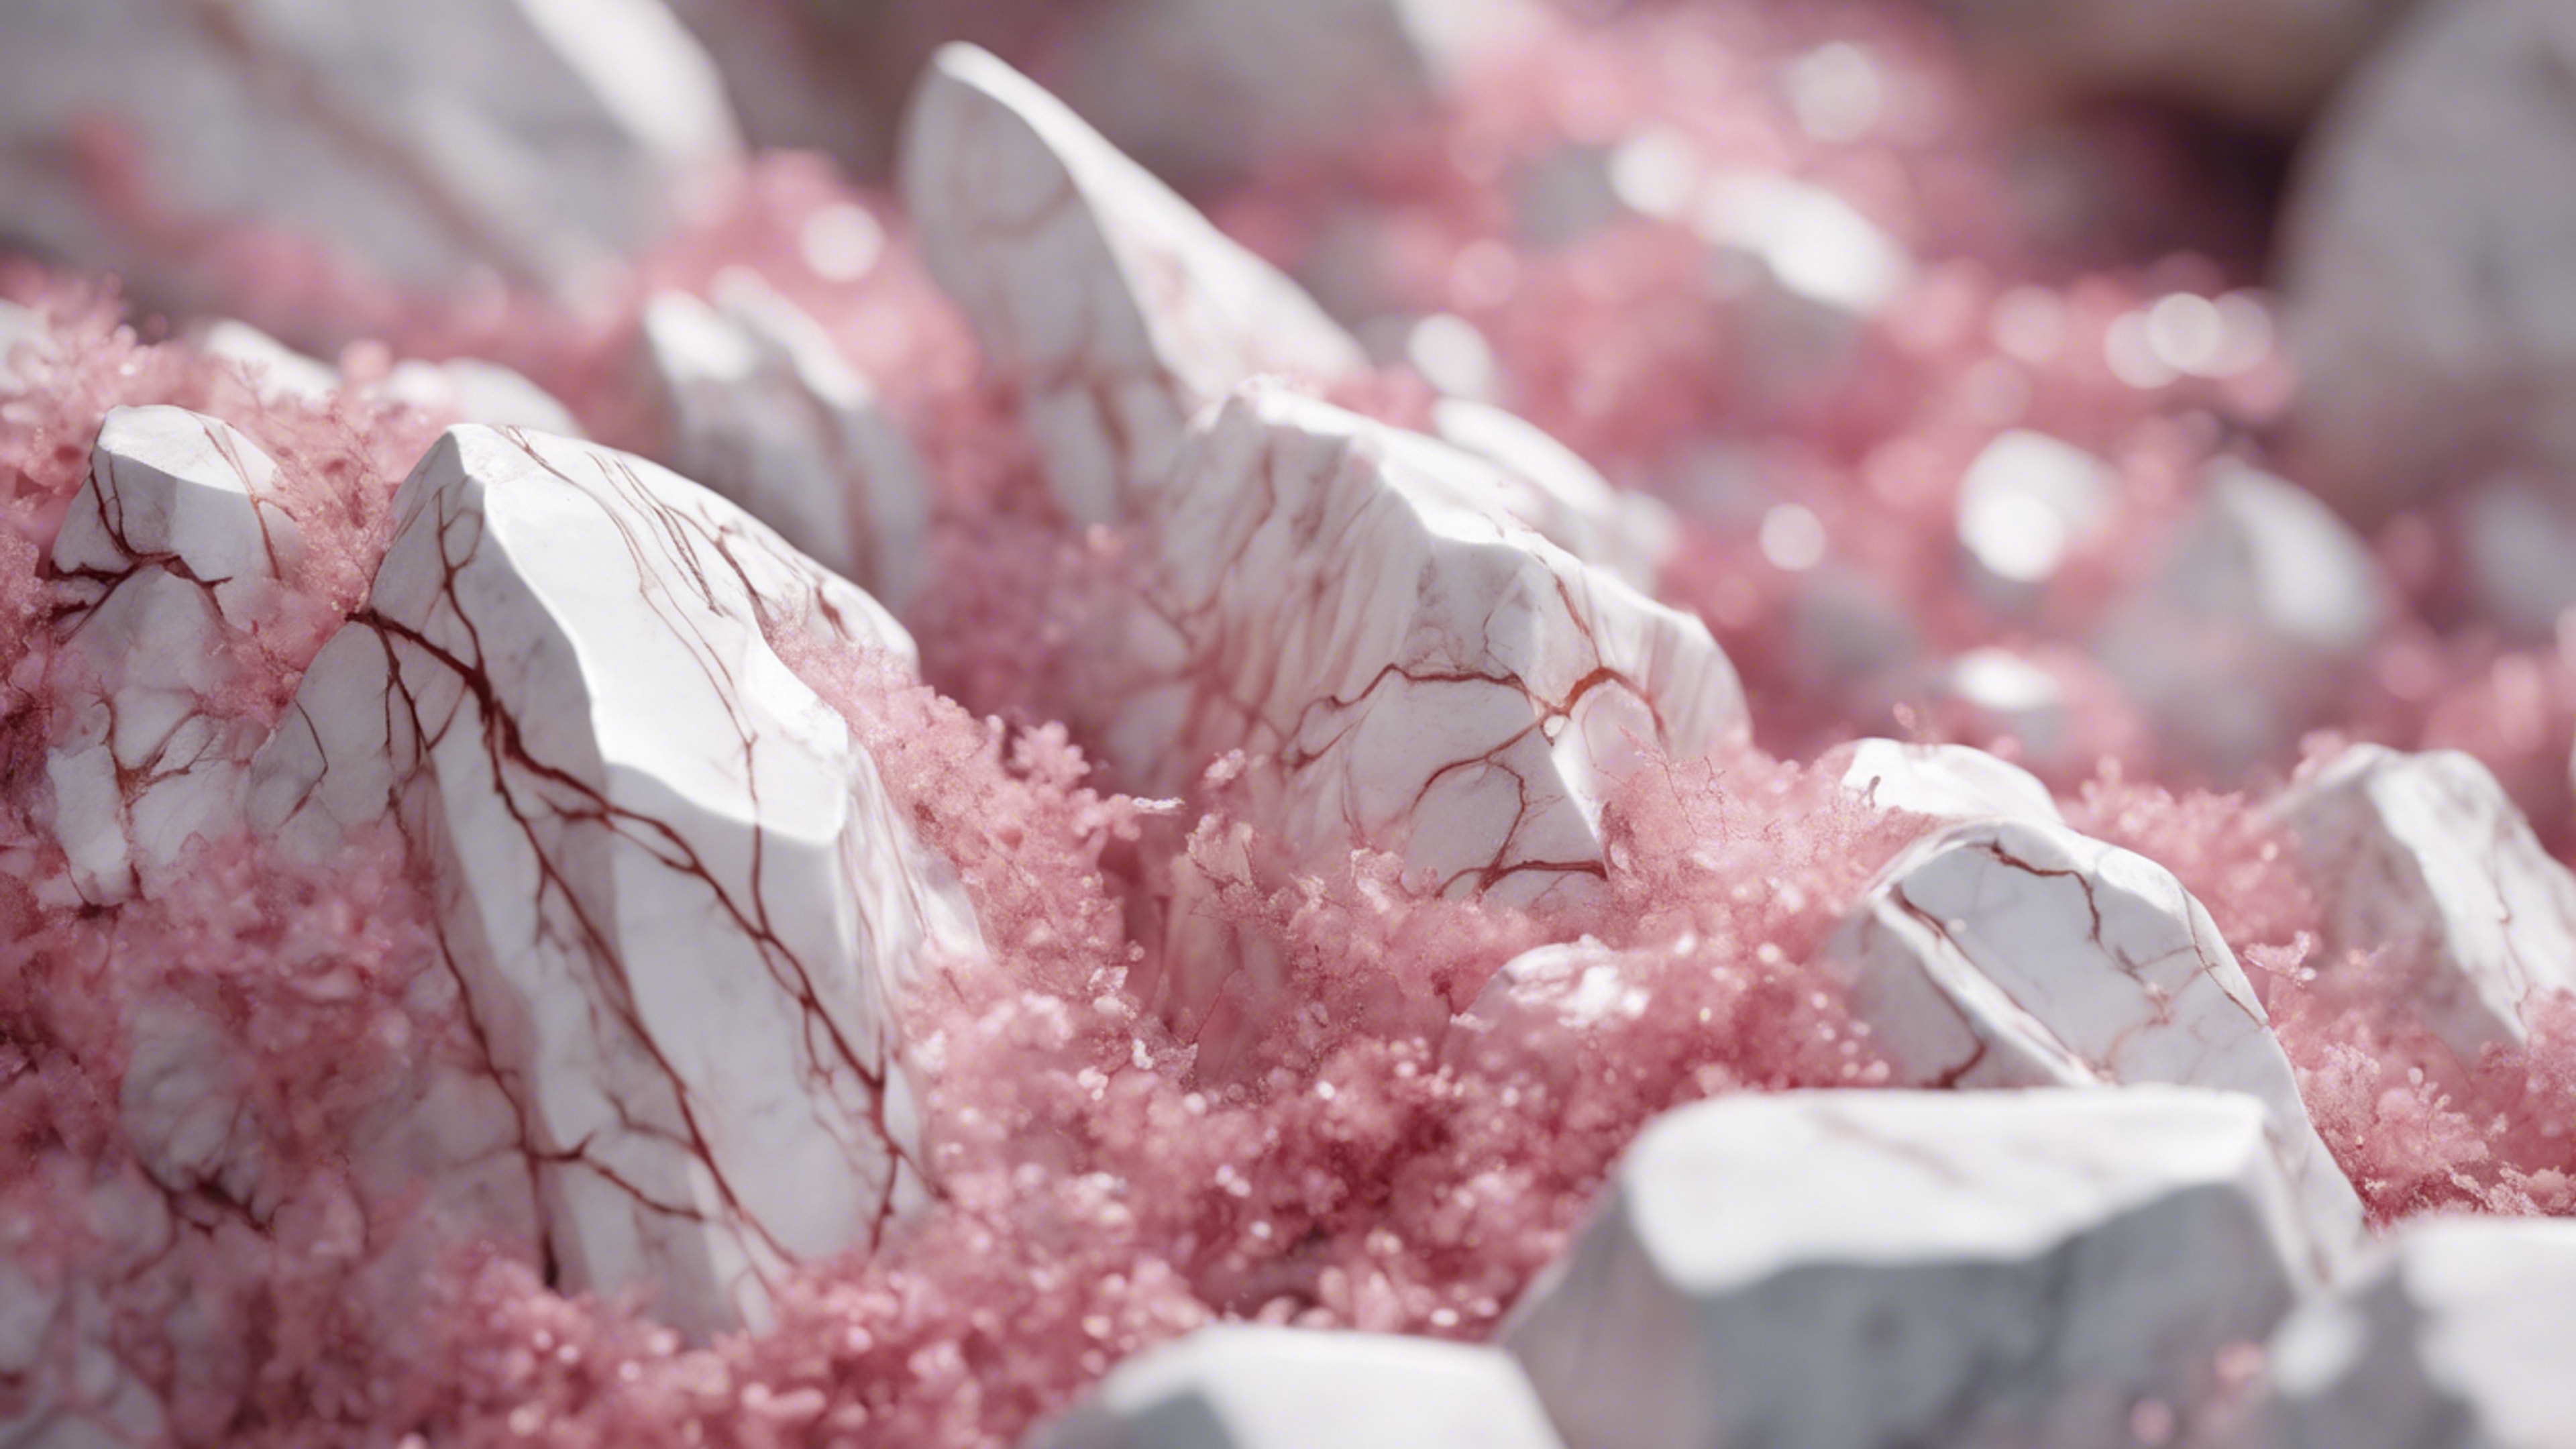 Pink and white veins running through marble rocks. Ფონი[3dd5ab4ab8a944e2820c]